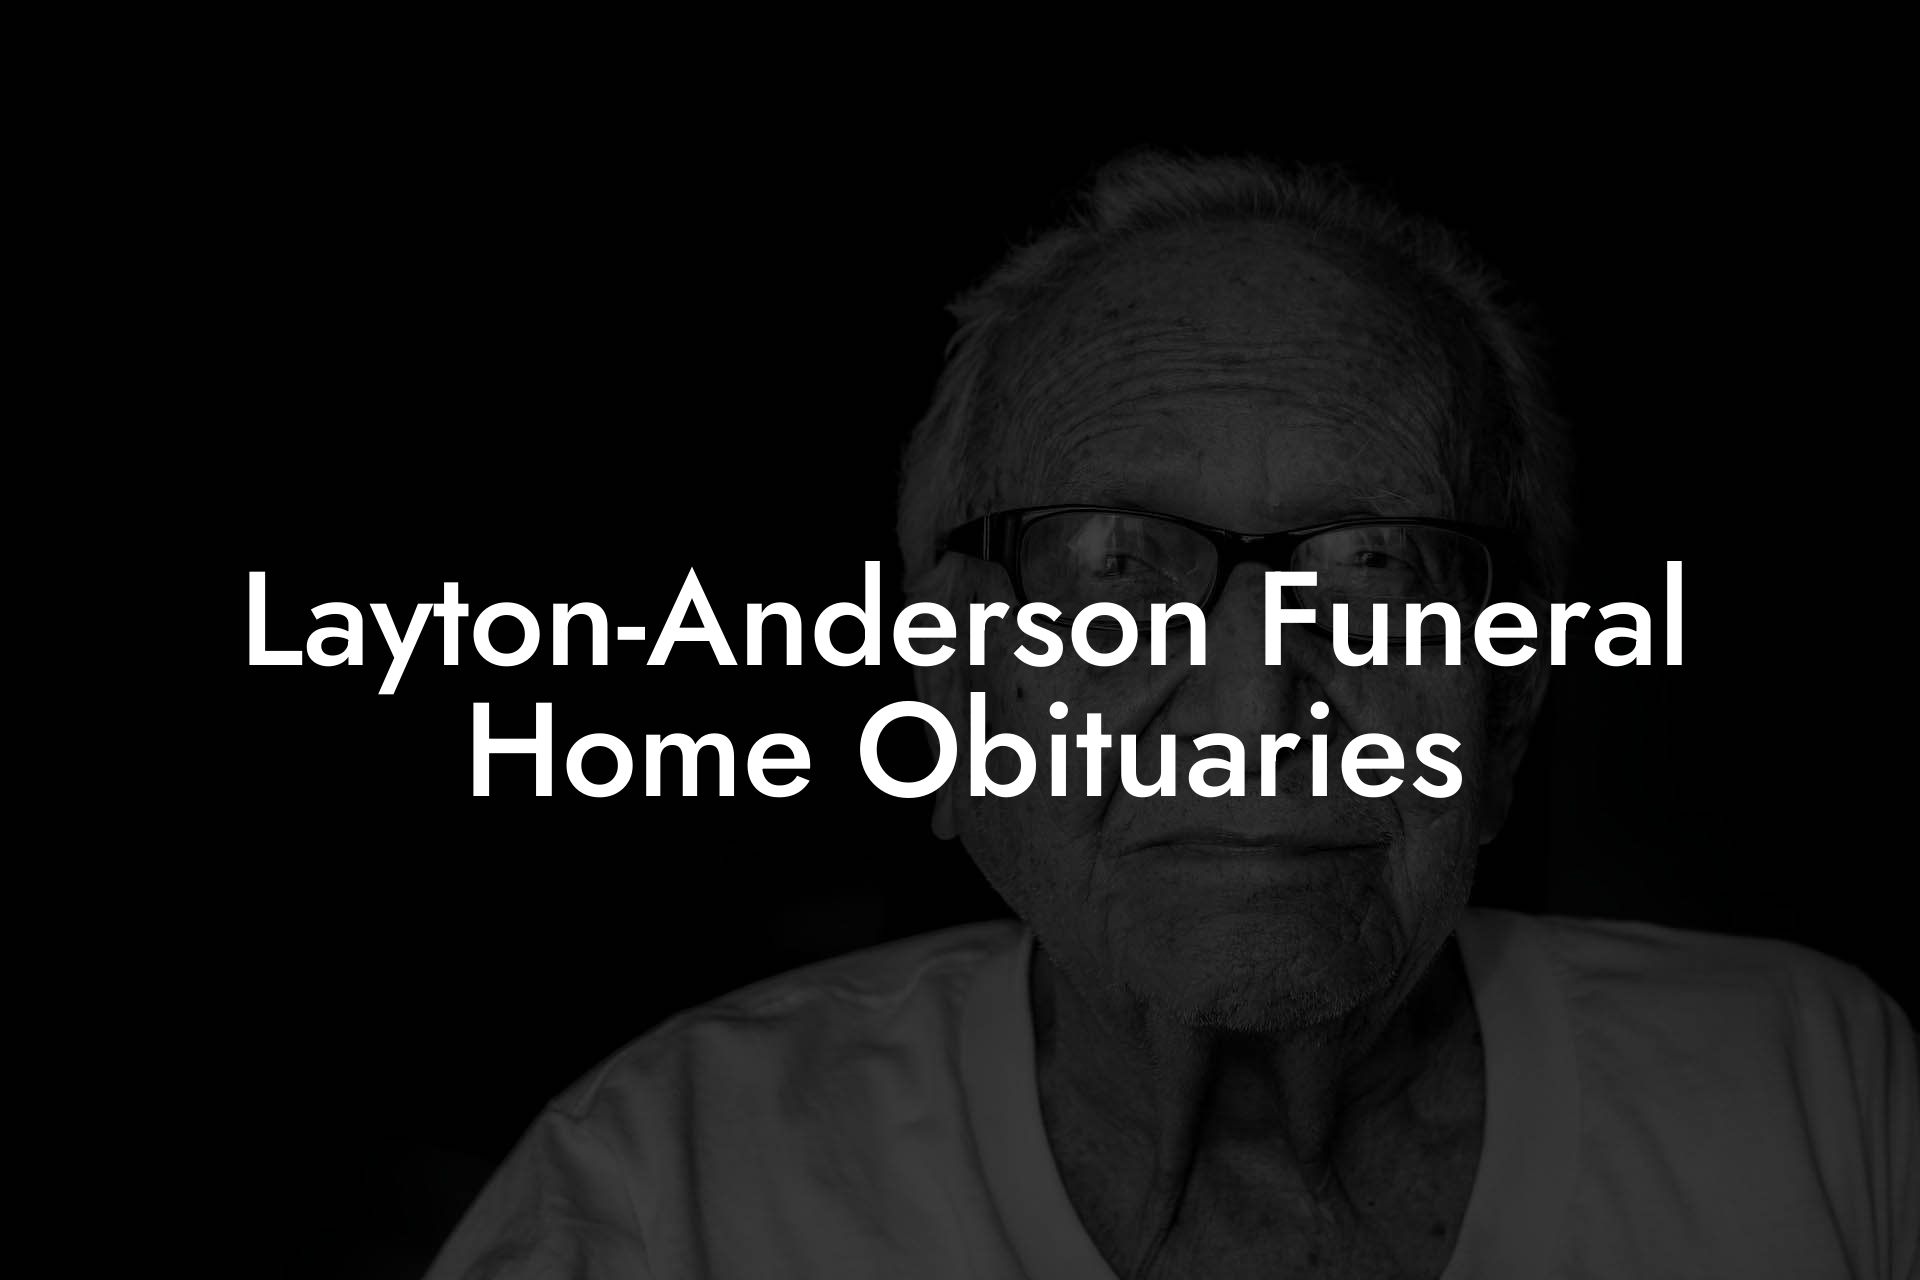 Layton-Anderson Funeral Home Obituaries